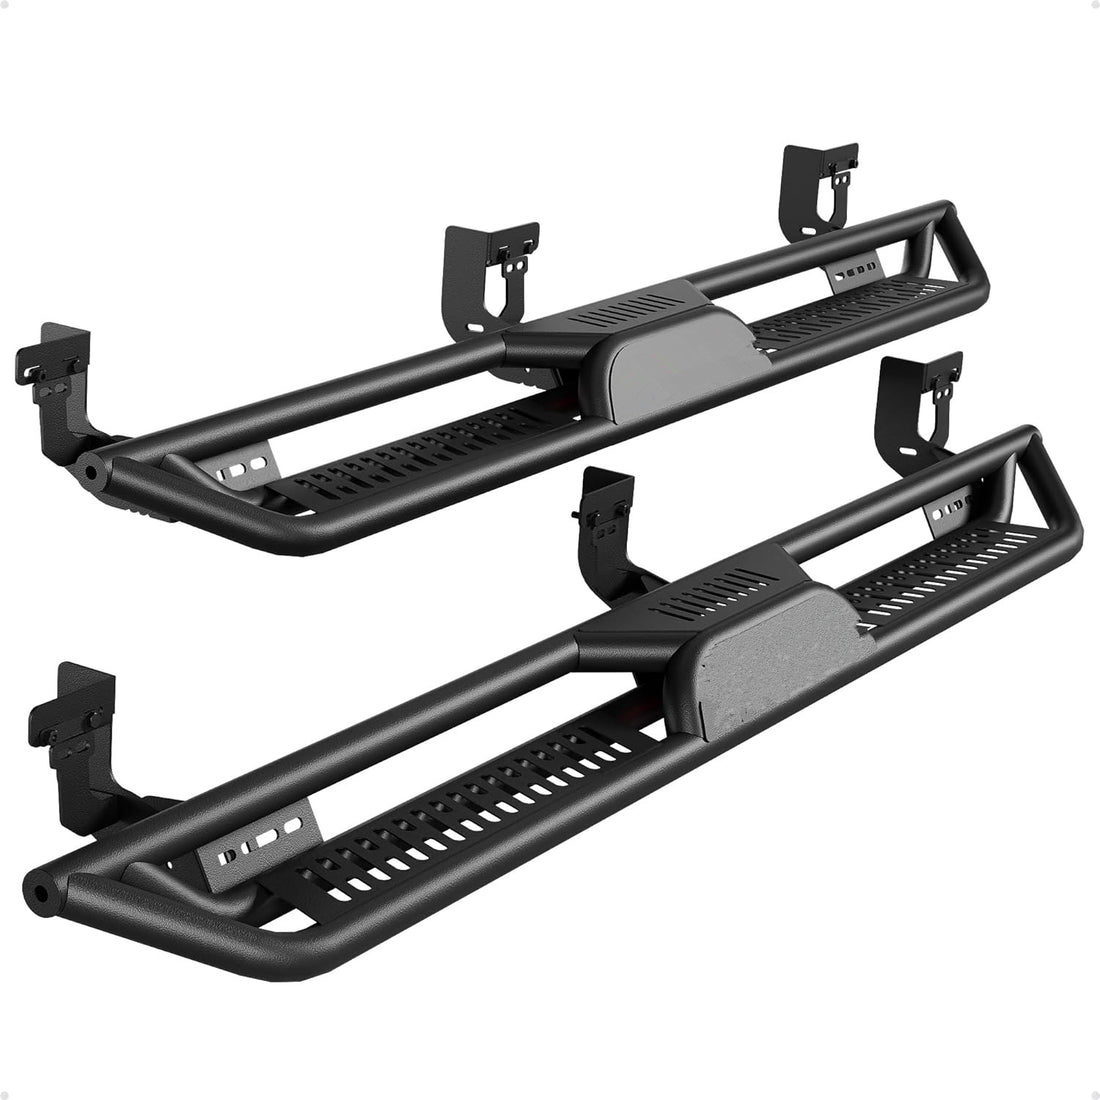 Running Boards 6.5 Inches with Two Stairs Design Compatible with 2009-2018 Dodge Ram 1500, 2019-2023 Ram 1500 Classic, 2010-2022 Ram 2500 3500 Crew Cab(4 Full-Size Doors), Bolt-on Side Steps